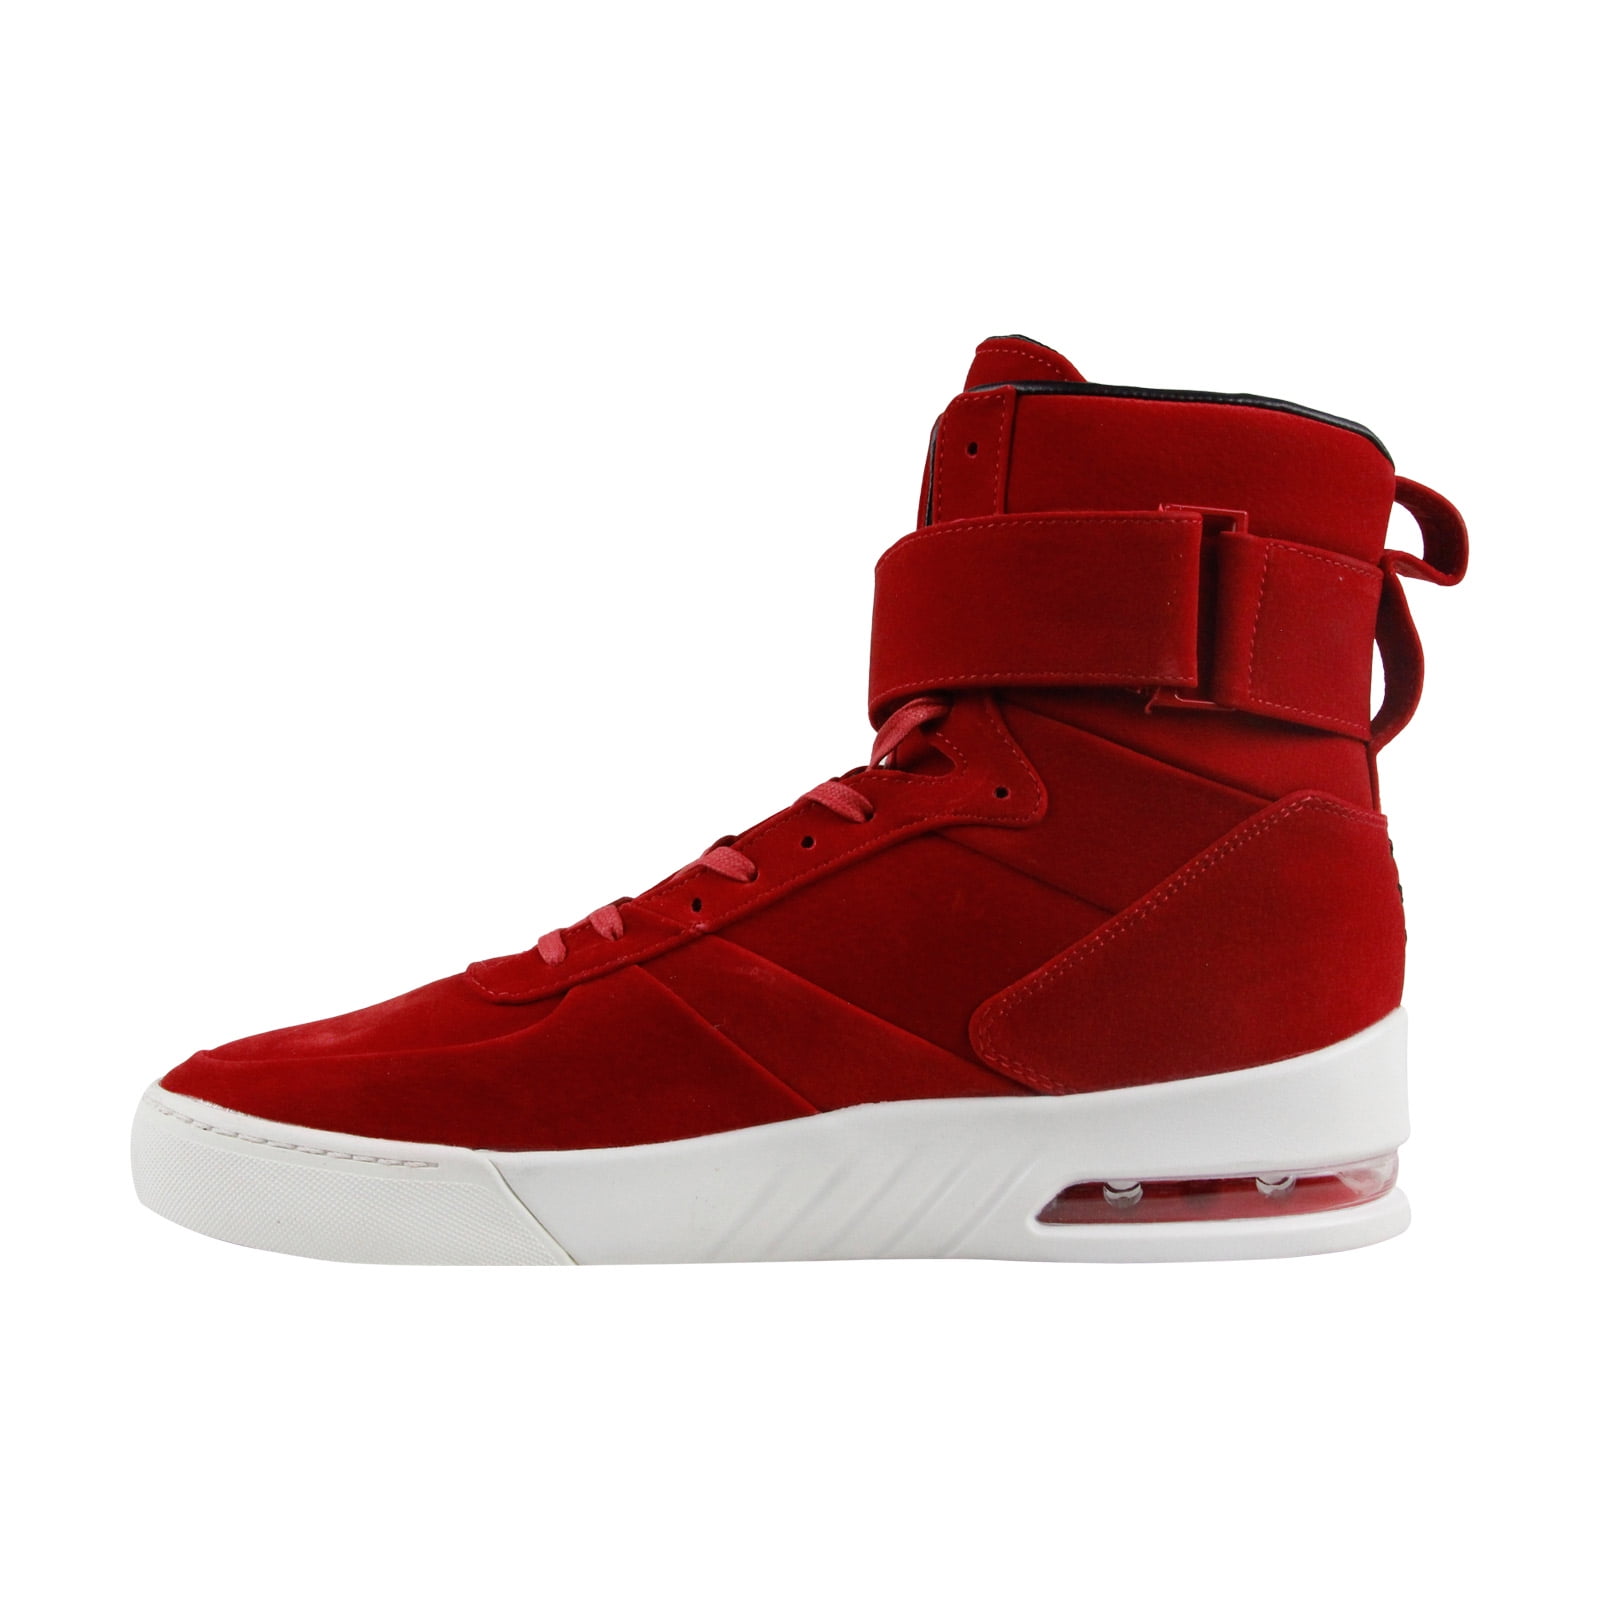 Radii Apex Mens Red Suede High Top Lace 